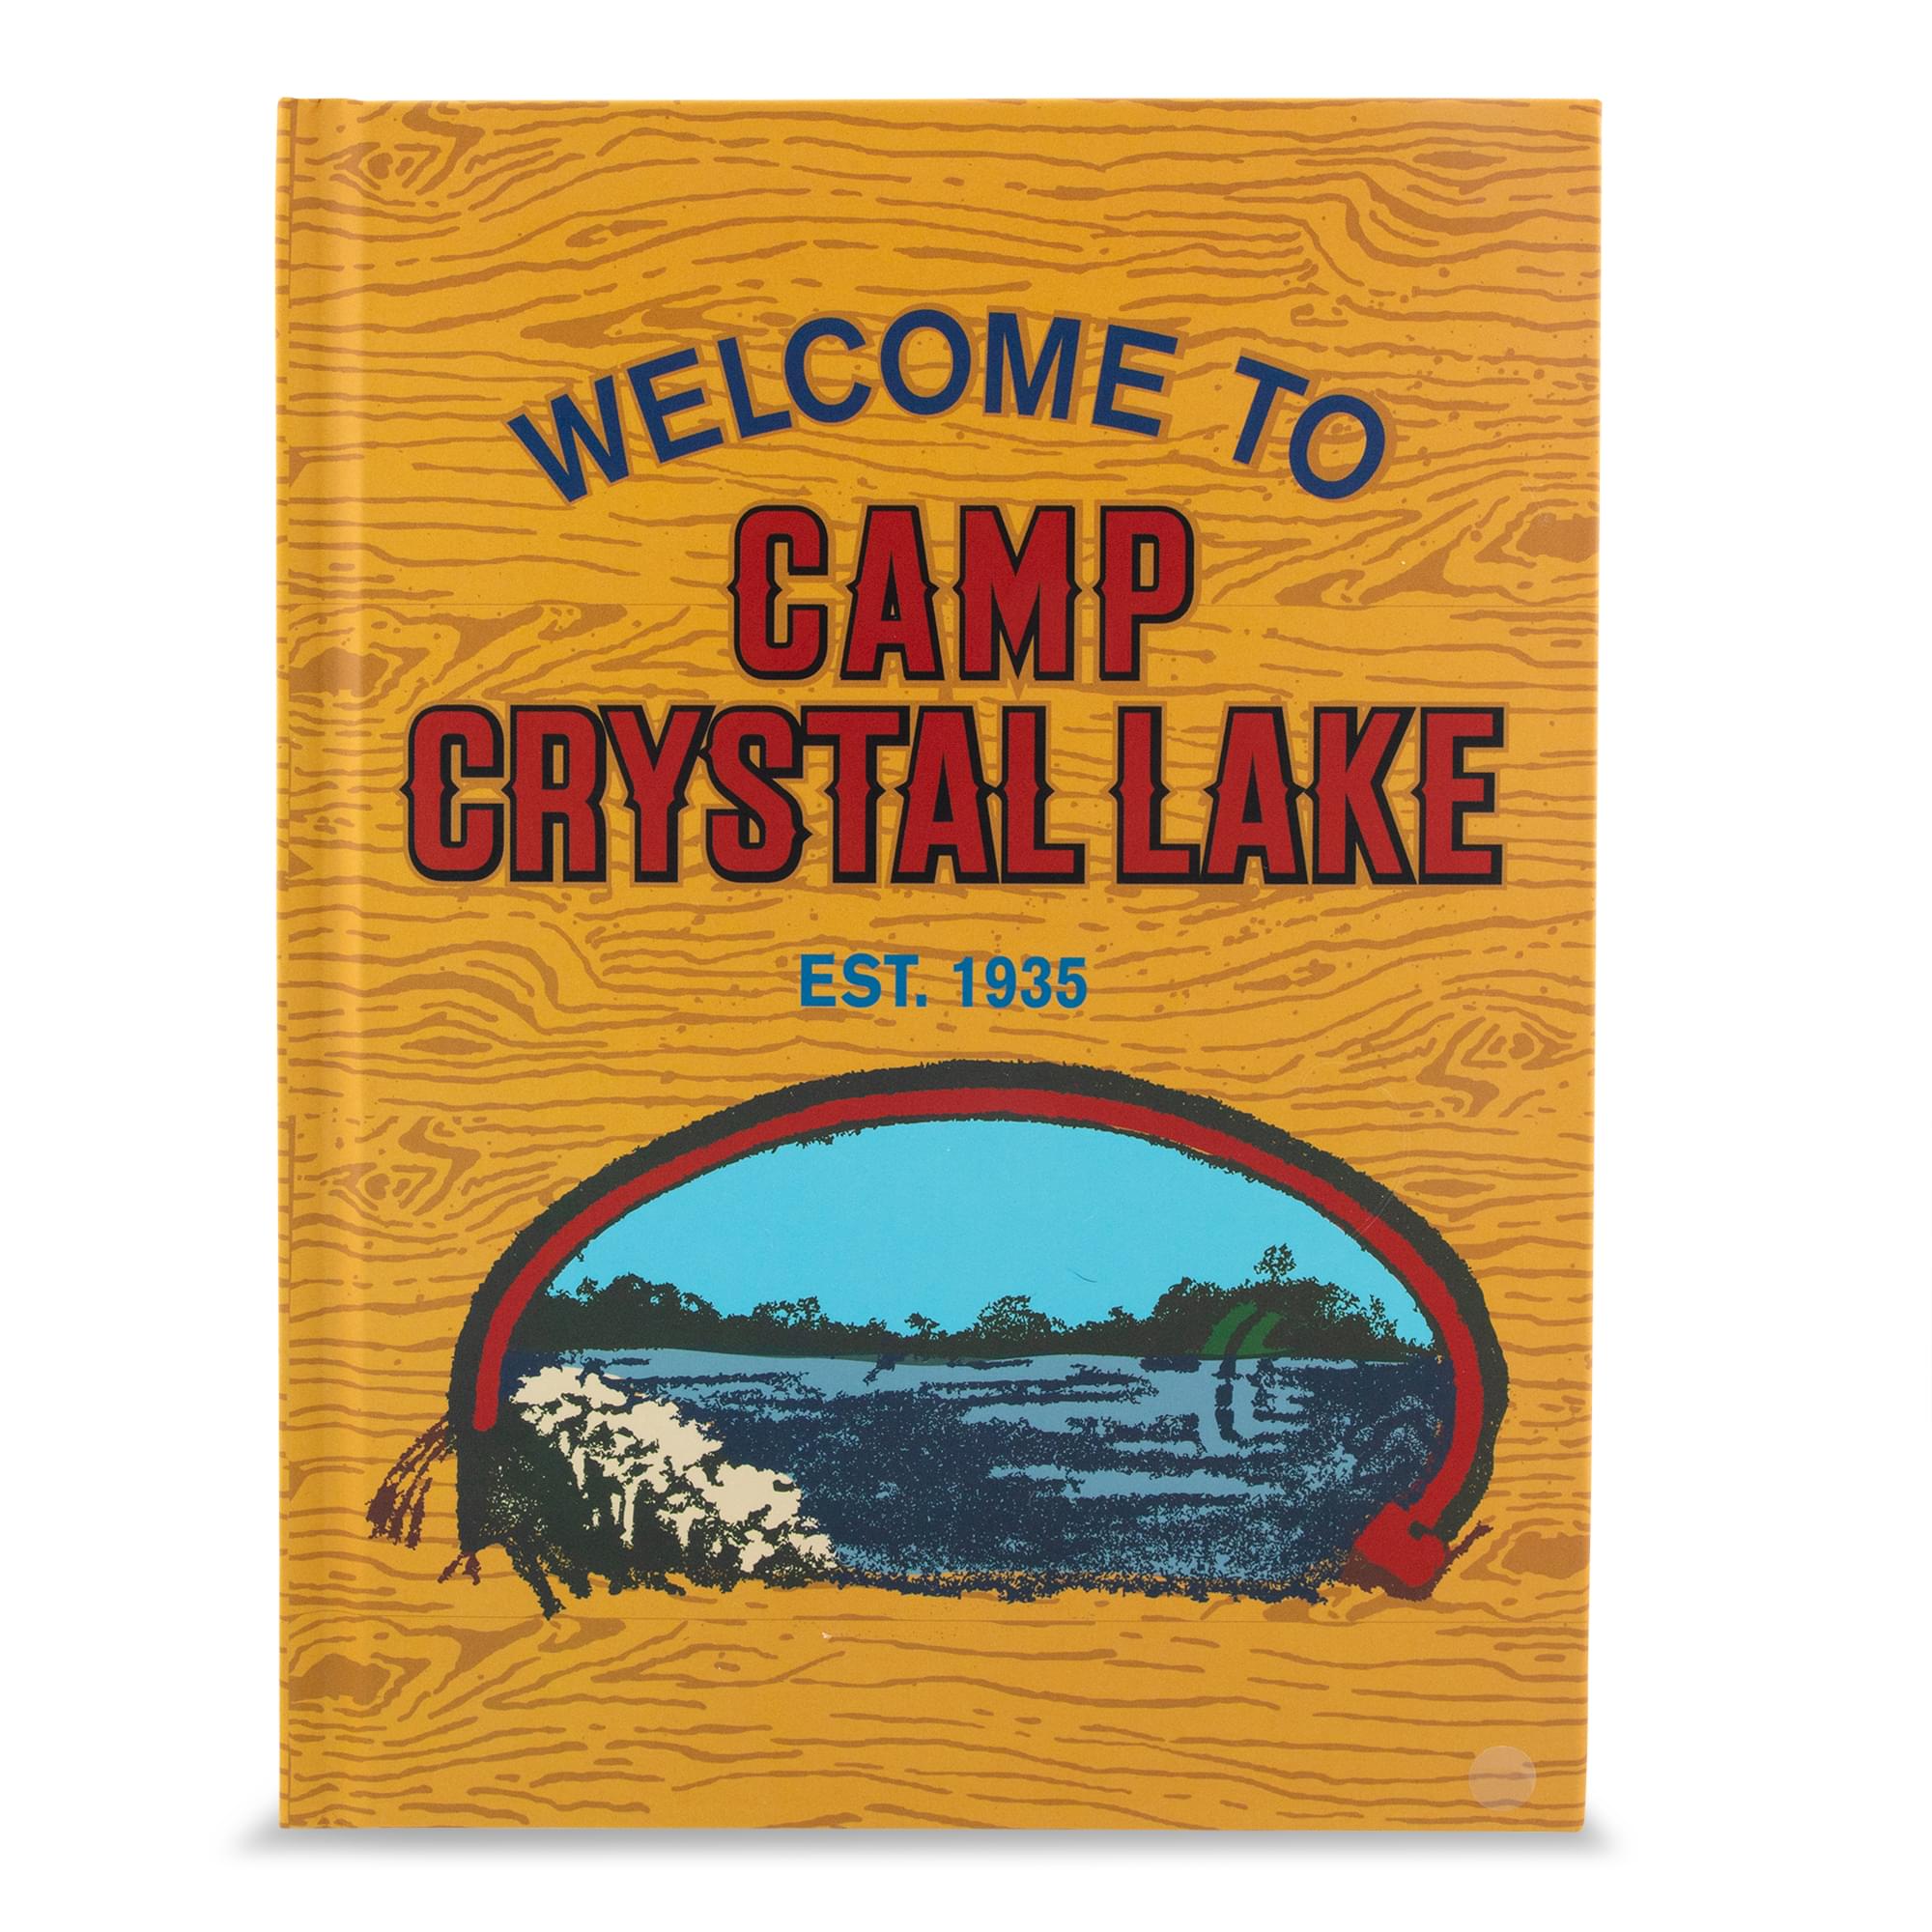 Friday The 13th Welcome To Camp Crystal Lake Hardcover Journal Notebook